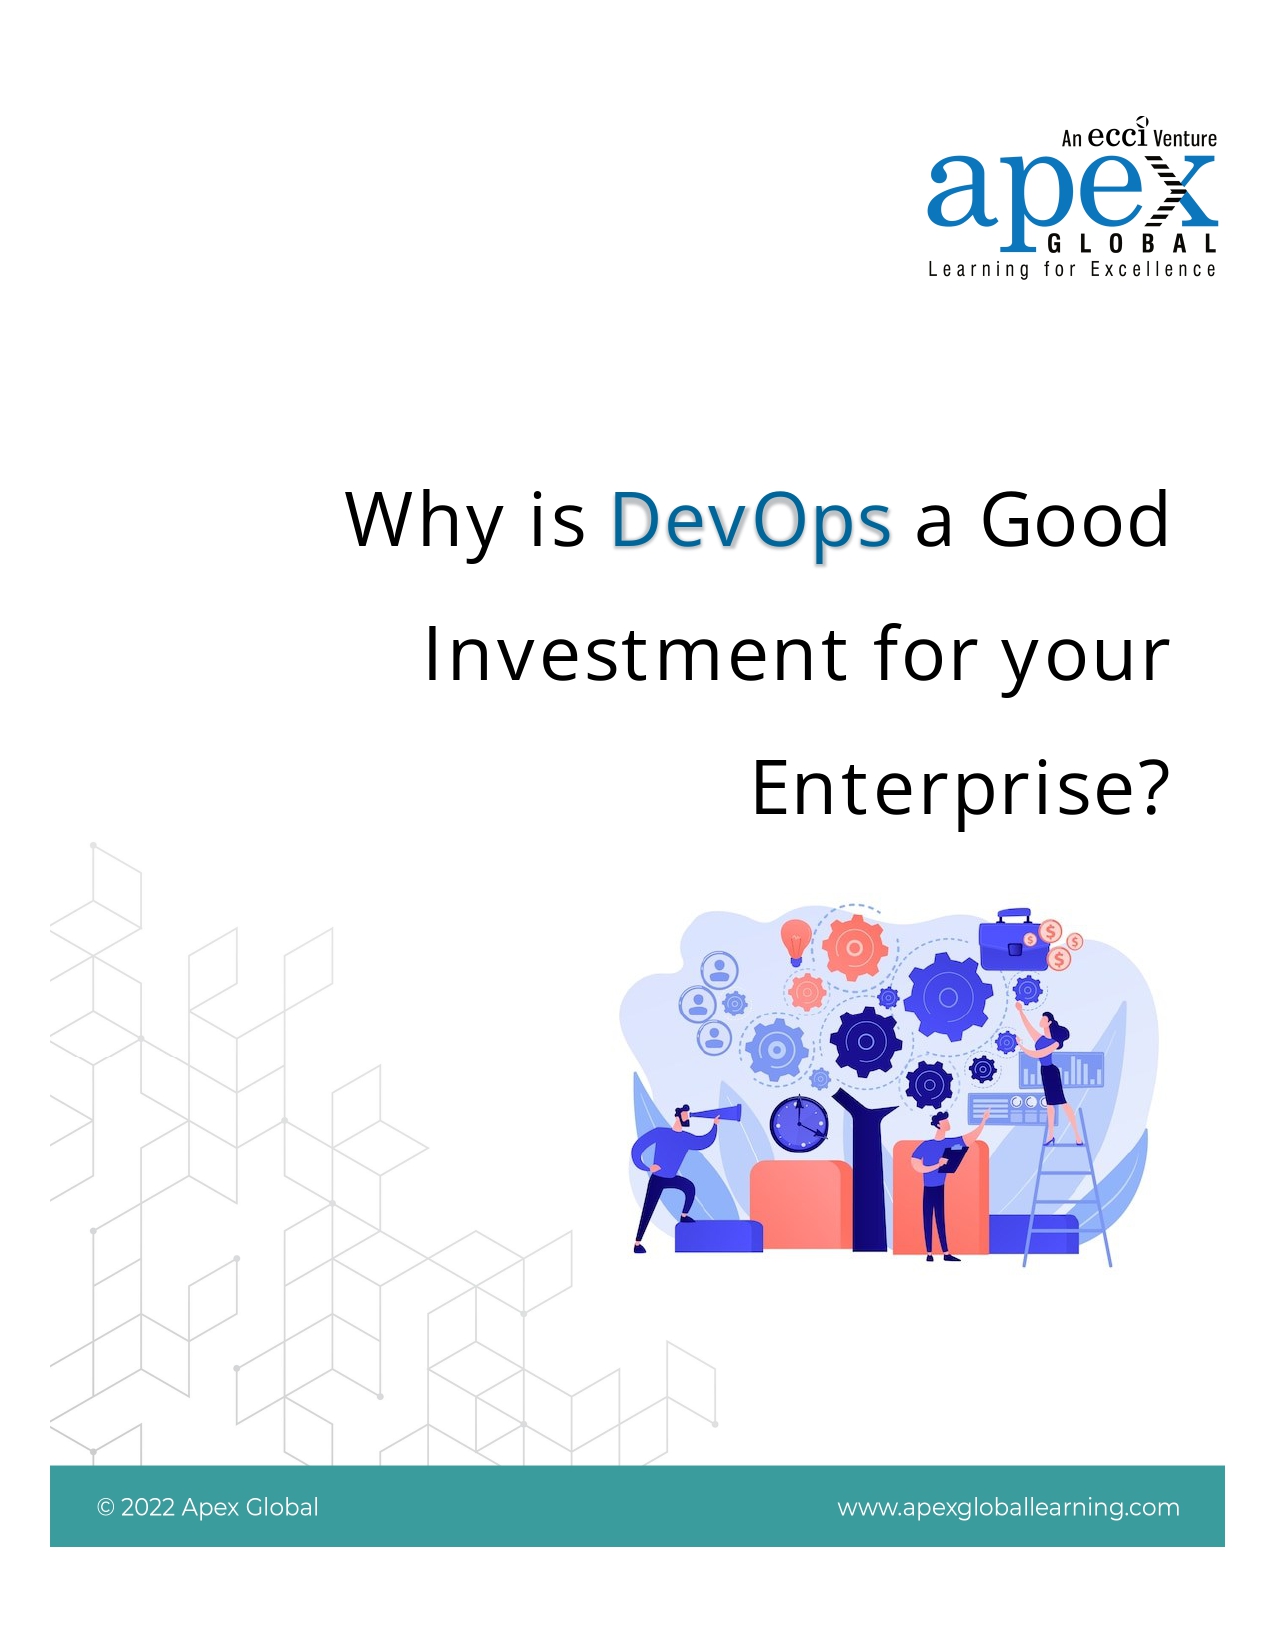 Why is DevOps a Good Investment for your Enterprise_page-0001